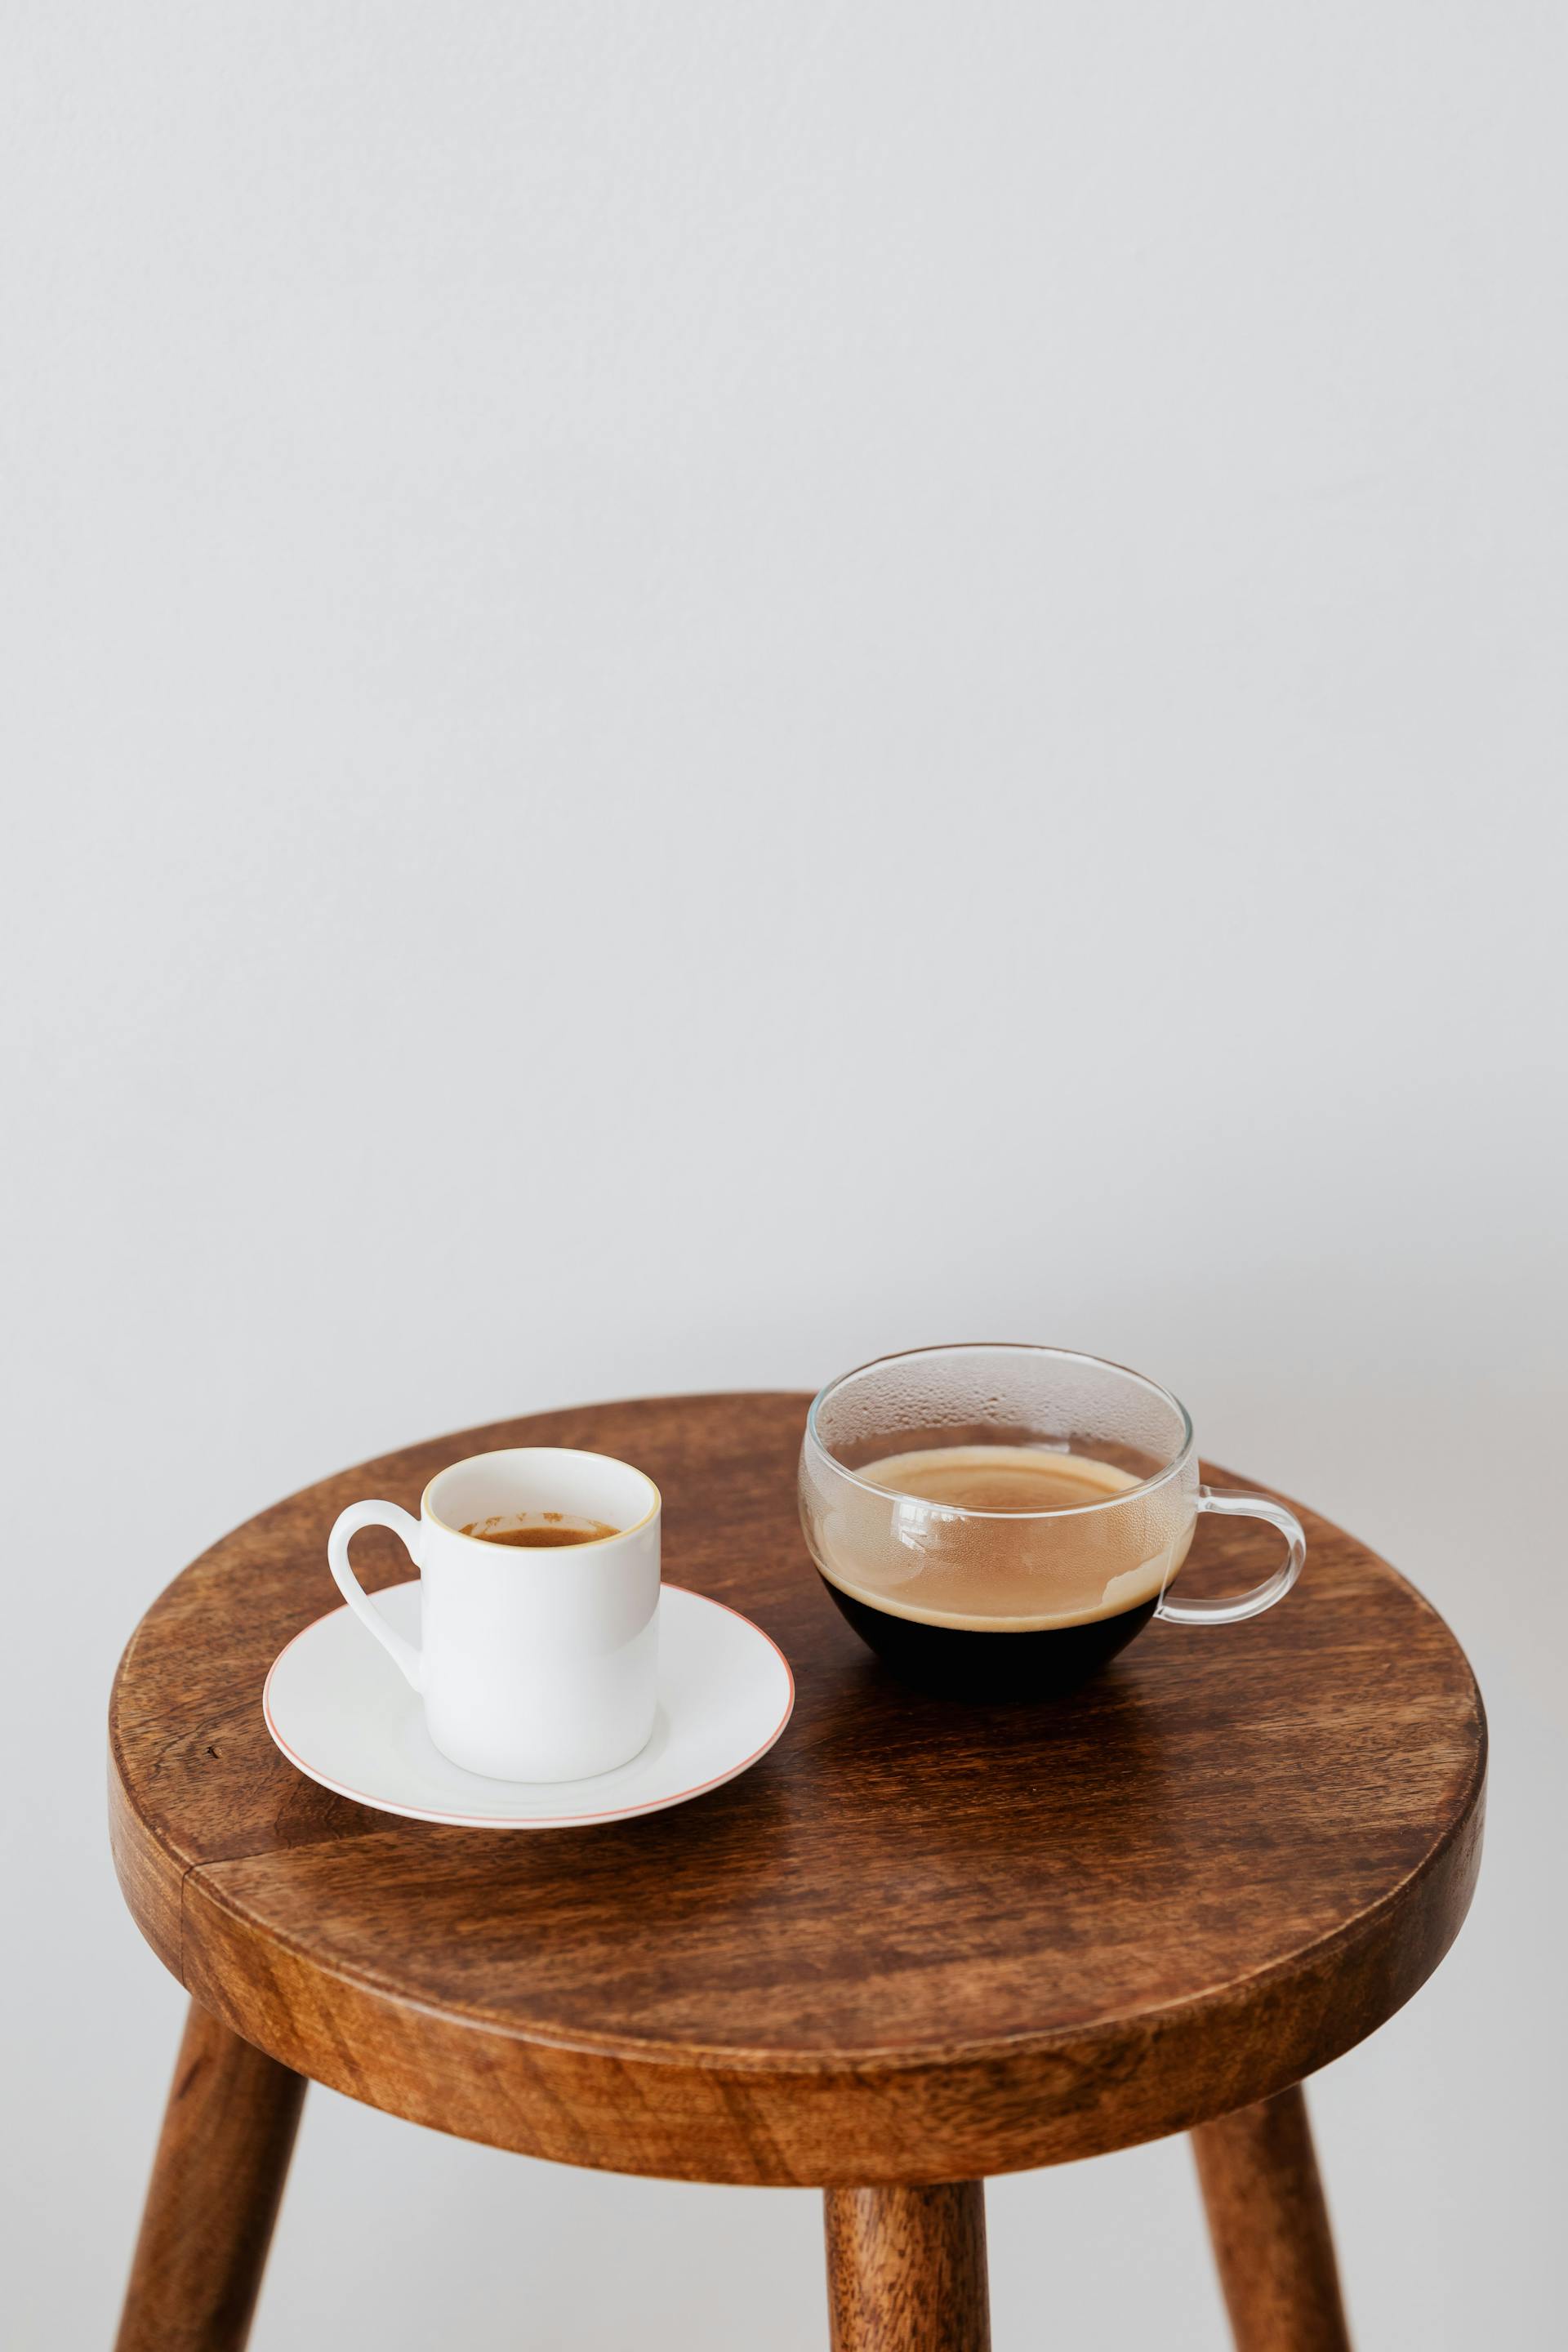 Mugs on a table | Source: Pexels